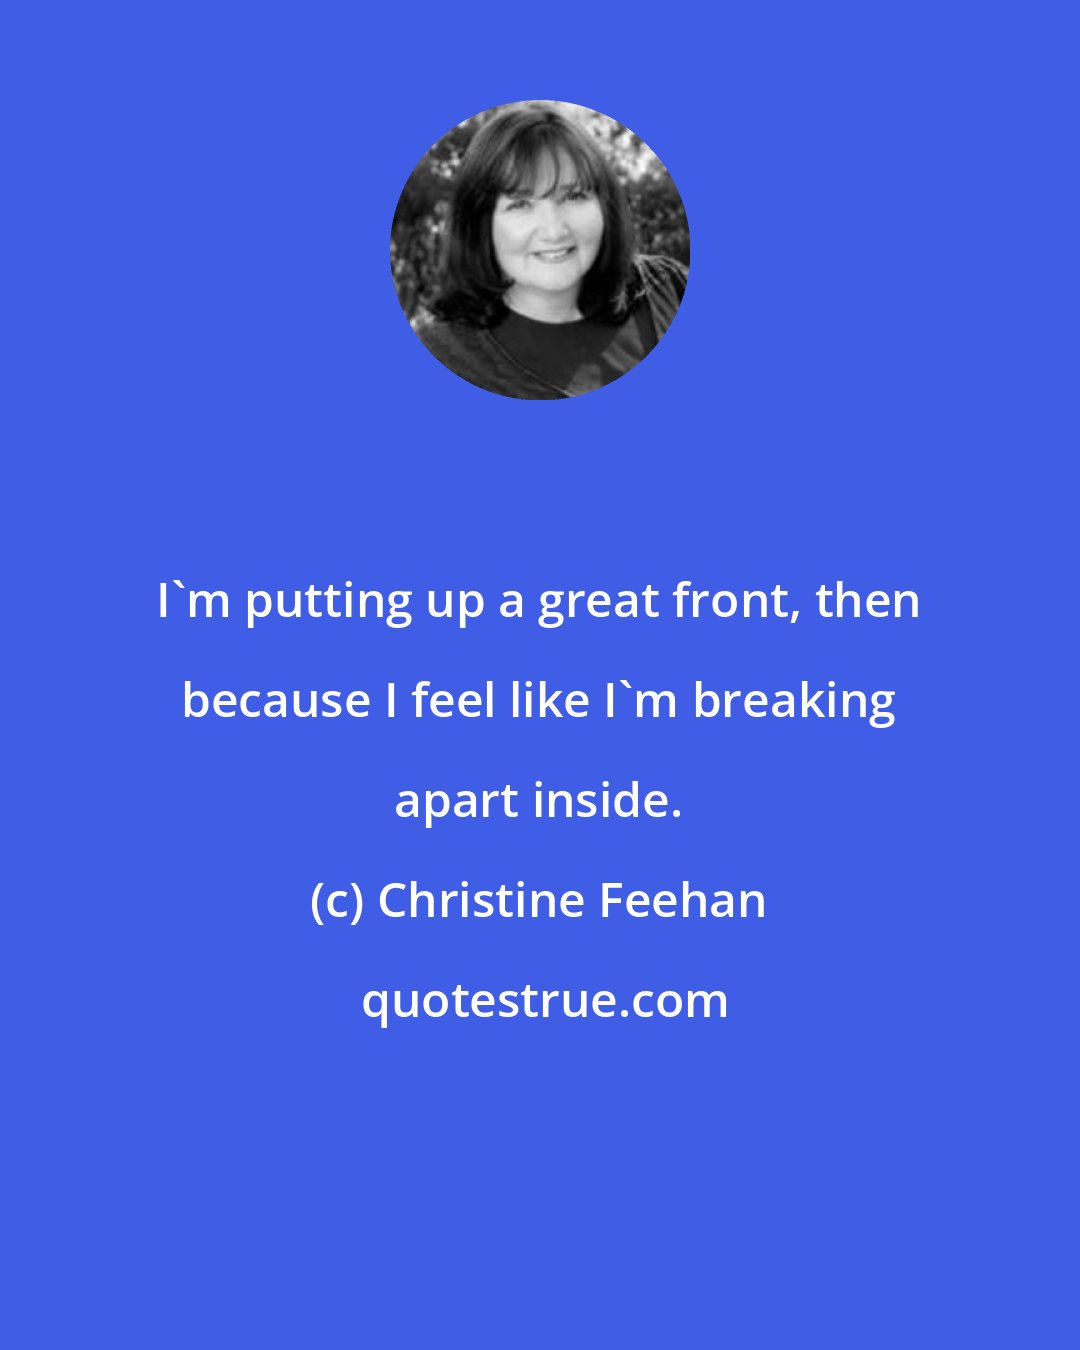 Christine Feehan: I'm putting up a great front, then because I feel like I'm breaking apart inside.